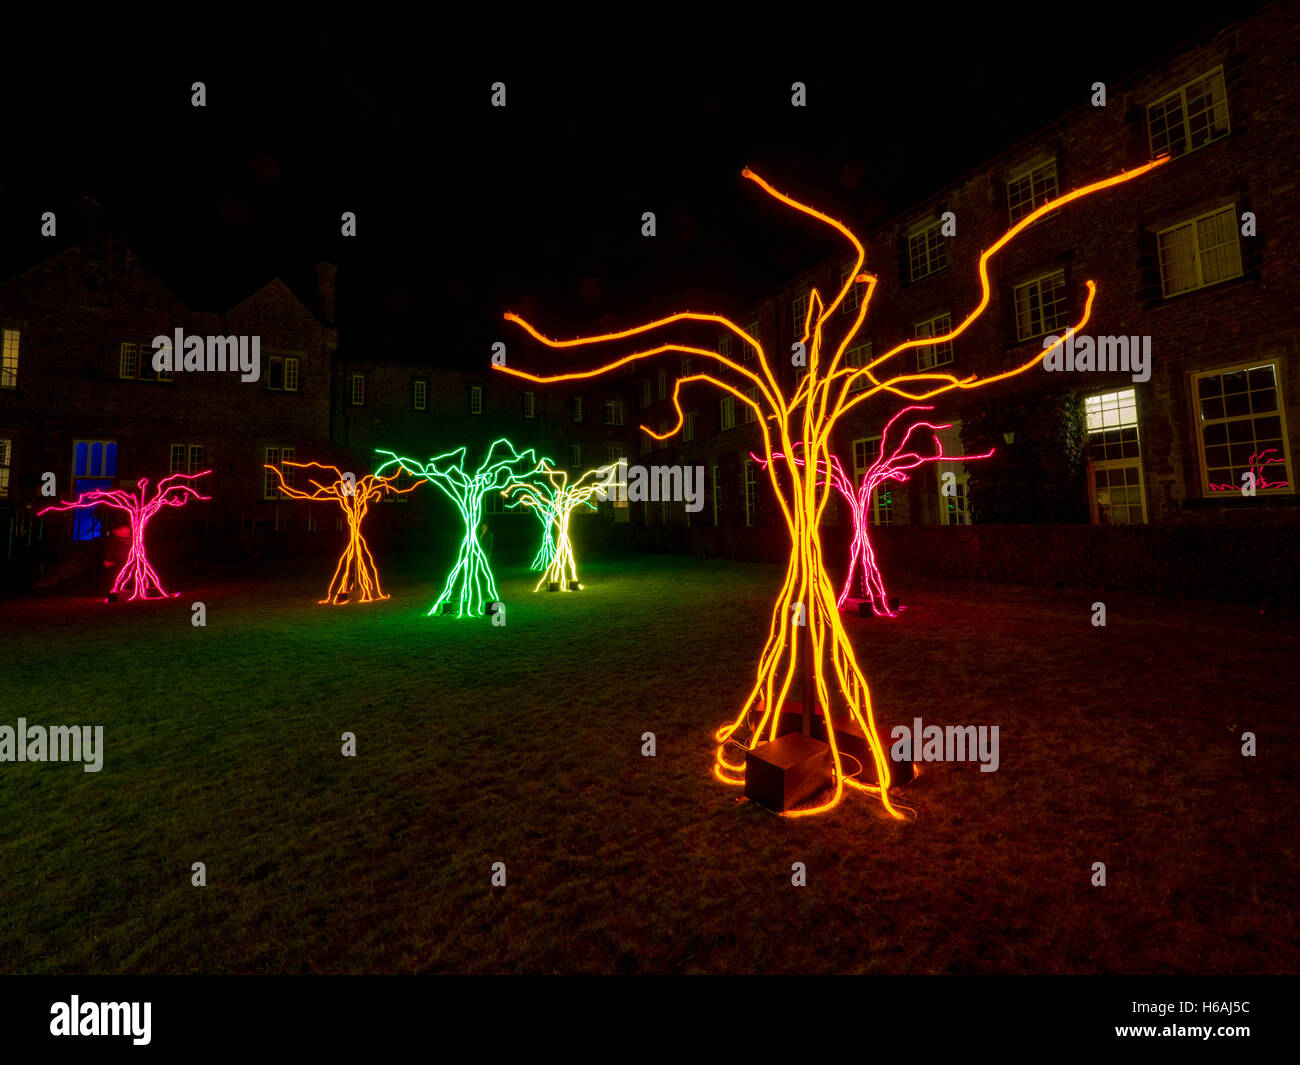 York, UK. 26th October, 2016. First night of the Illuminating York Festival which sees iconic buildings transformed using light painting and installations from international artists. Photo shows “Lumen” - a forest of light by David Ogle at York St John University. The festival runs until Saturday October 29th. Photo Bailey-Cooper Photography/Alamy Live News Stock Photo